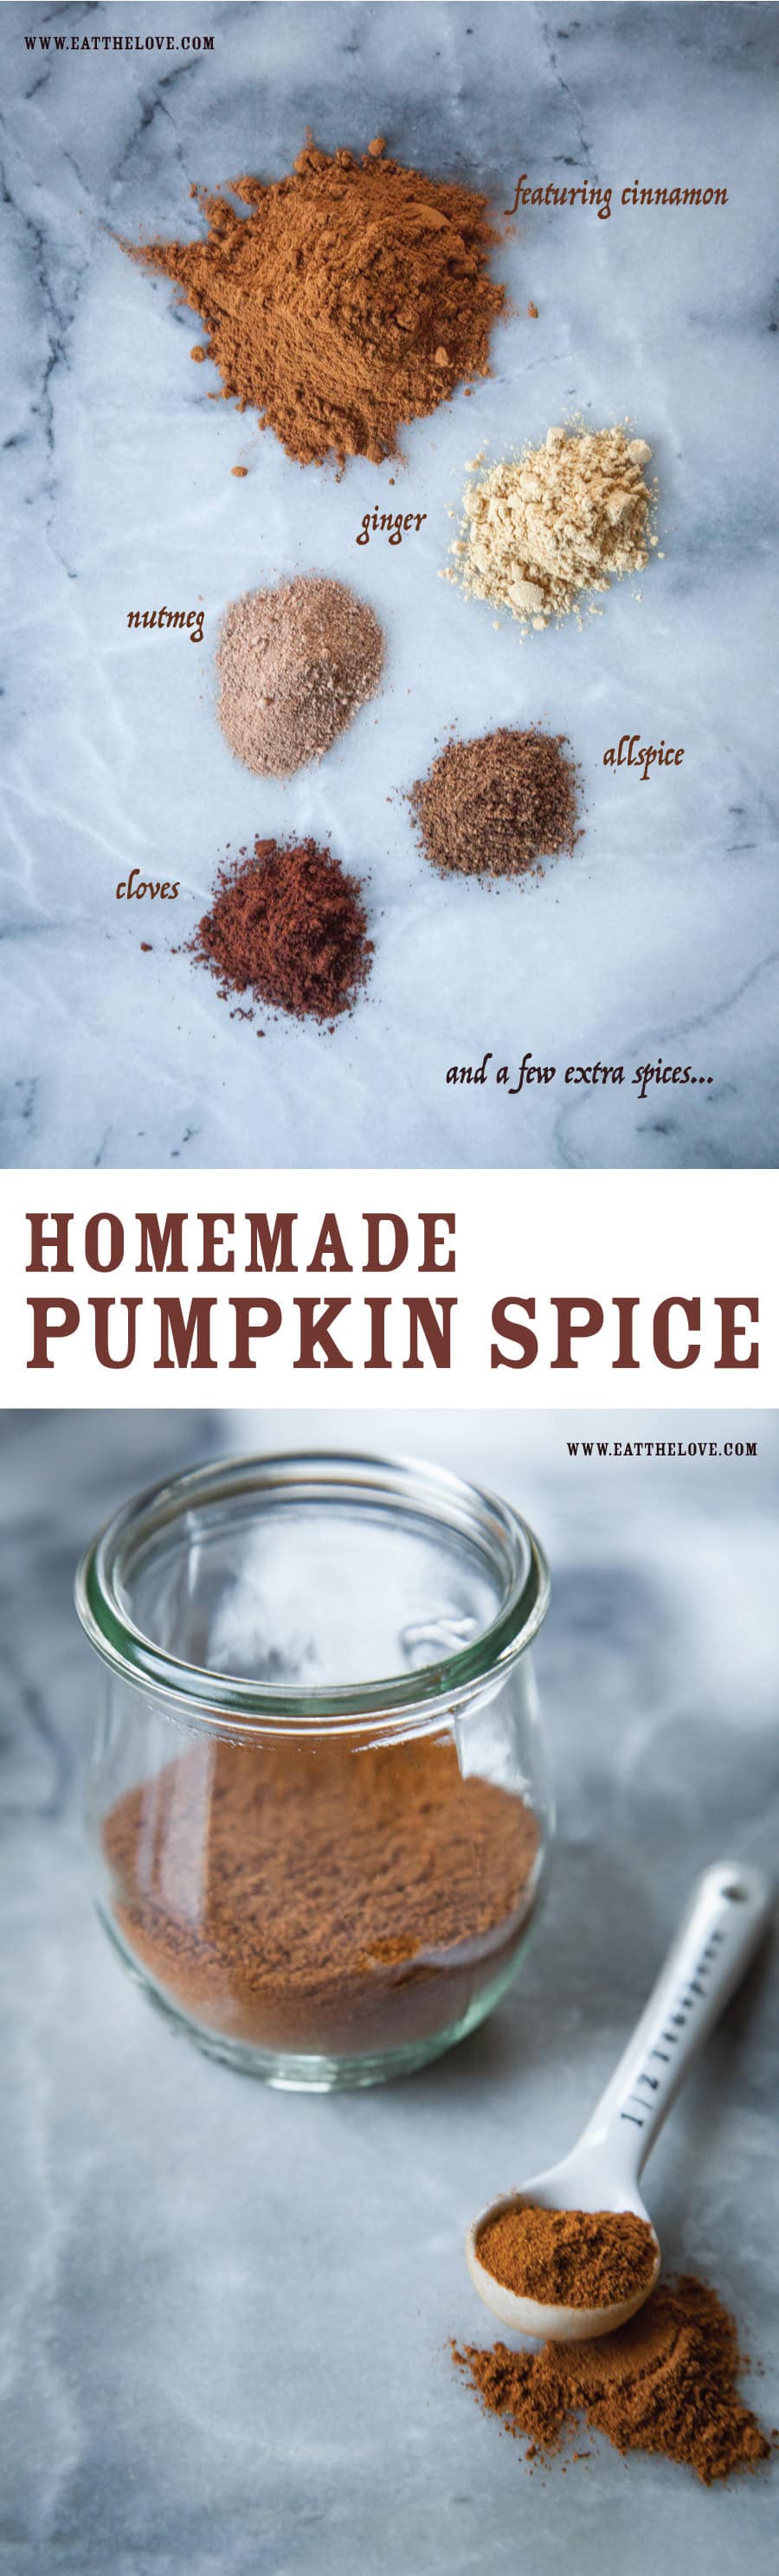 Homemade Pumpkin Spice with additional spice suggestions to customize to your own tastes! Photo and recipe by Irvin Lin of Eat the Love.